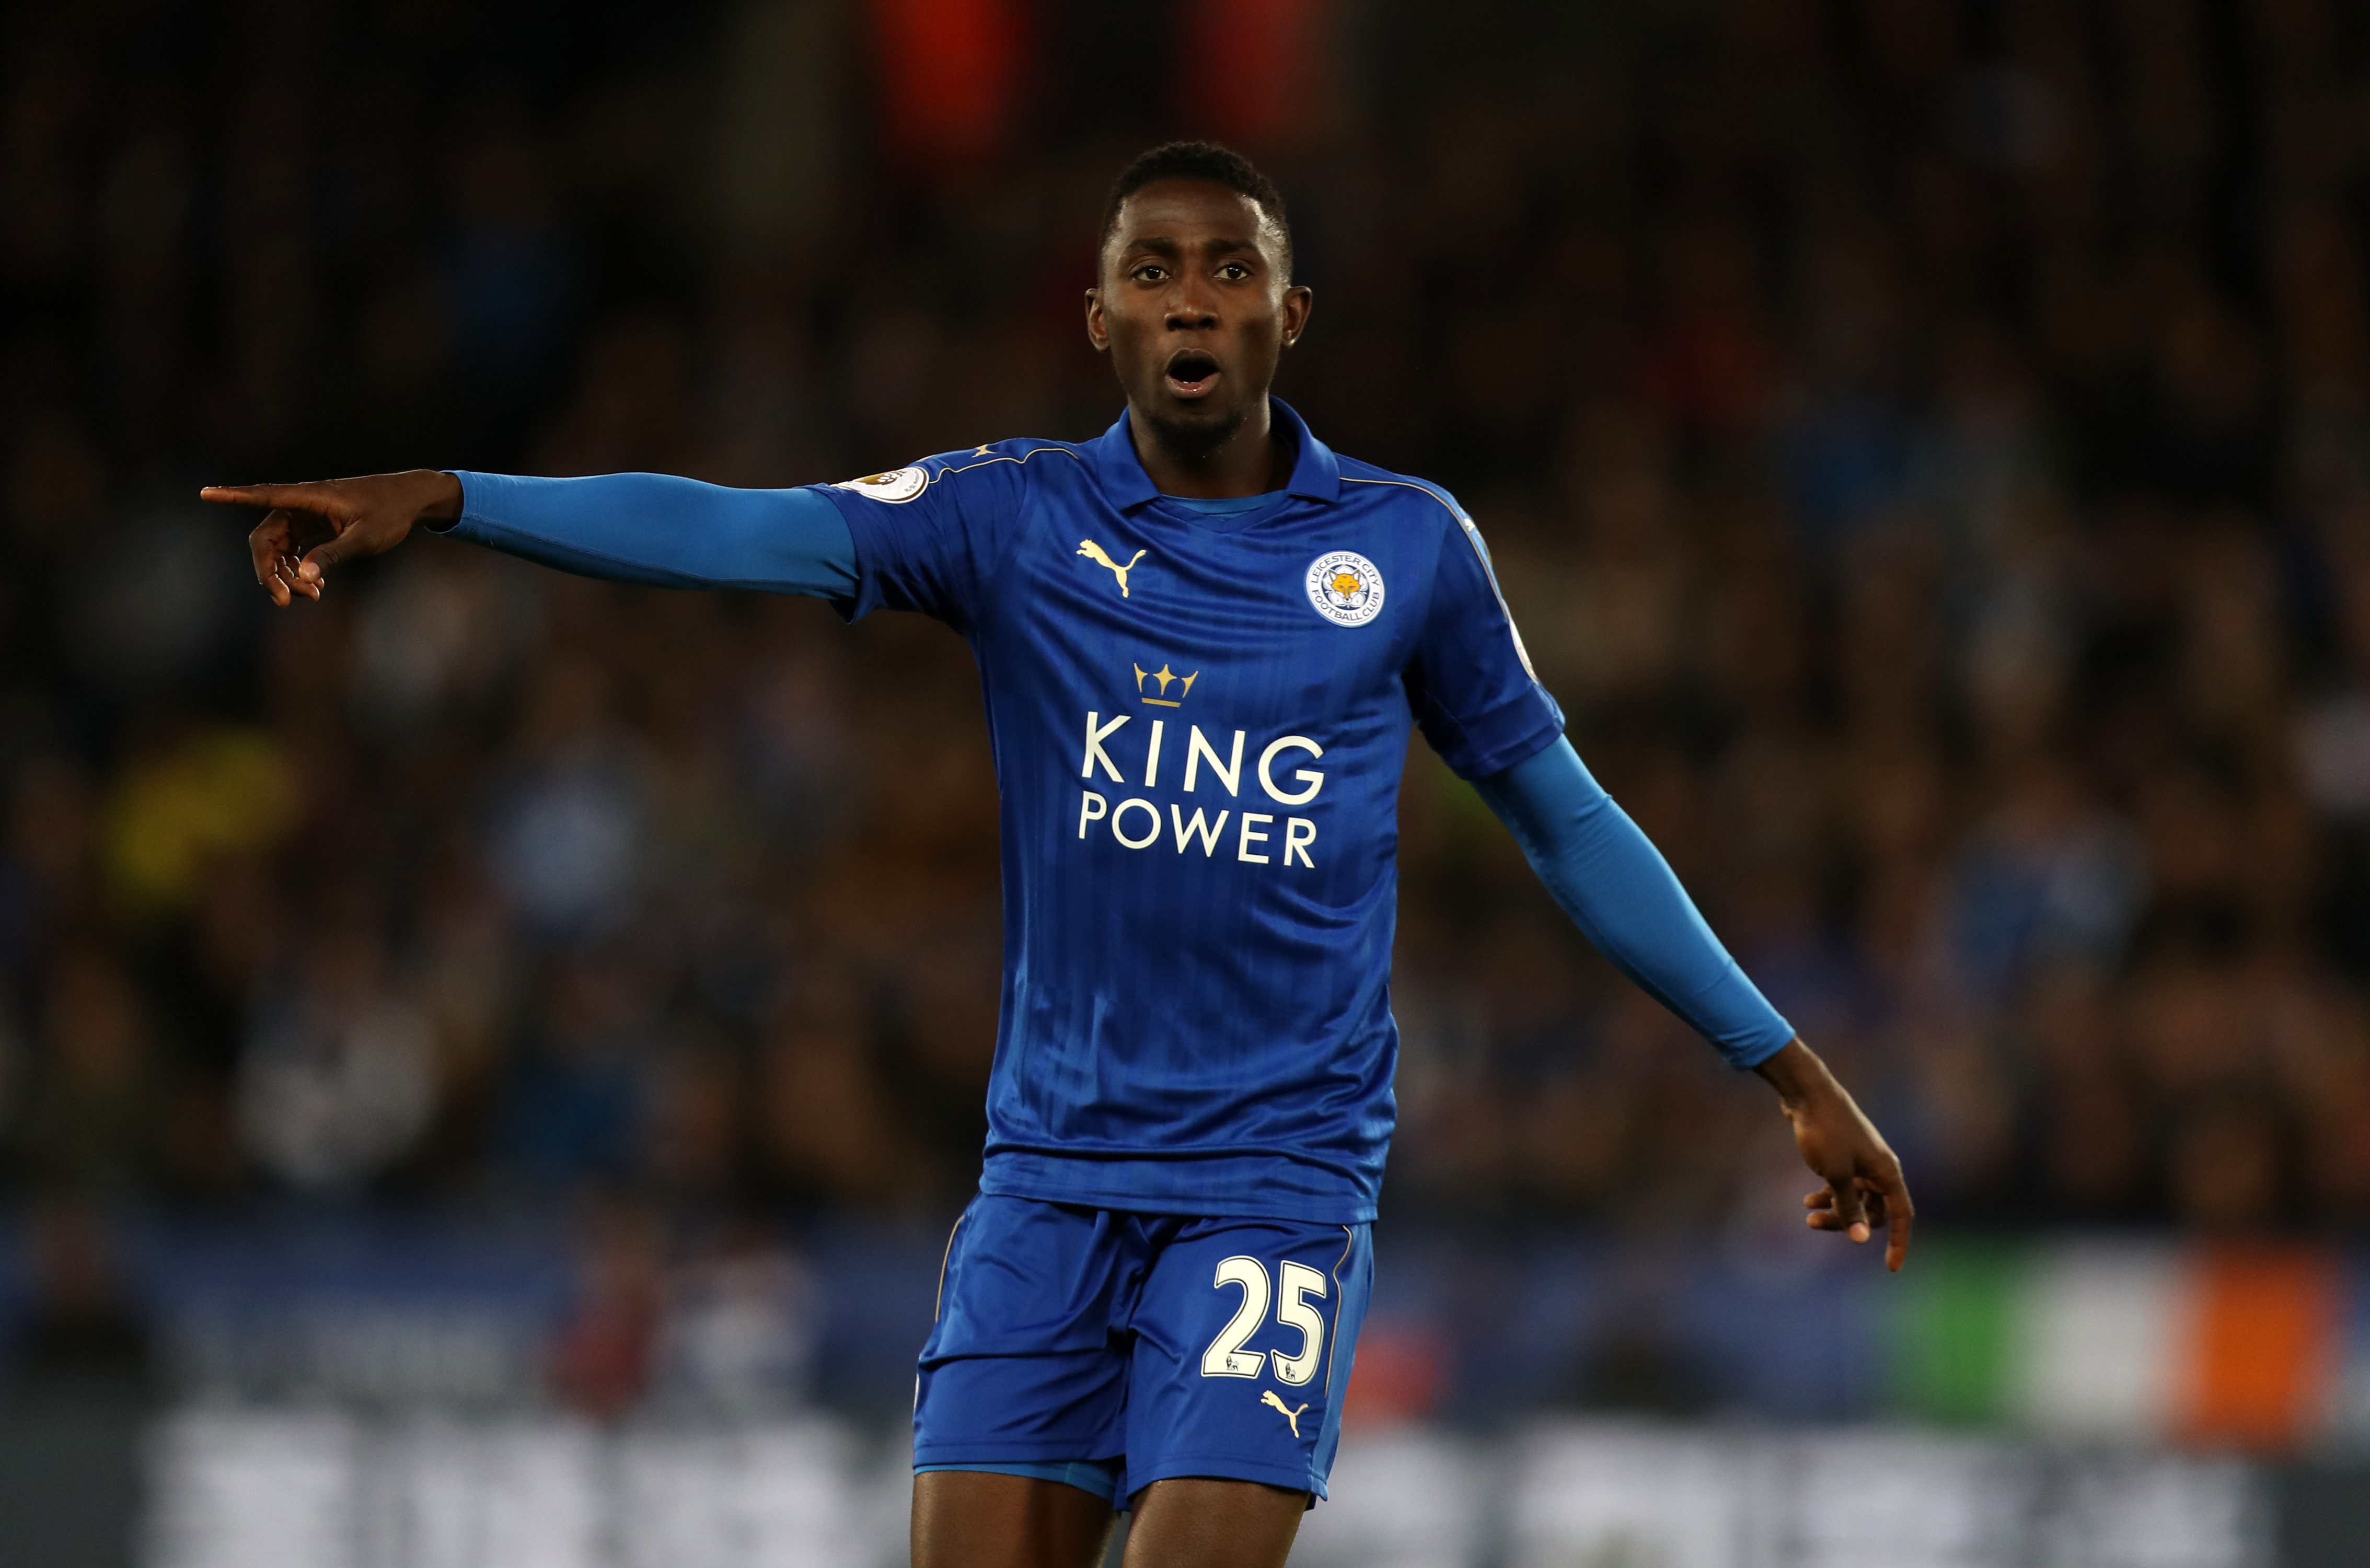 Leicester City's Wilfred Ndidi